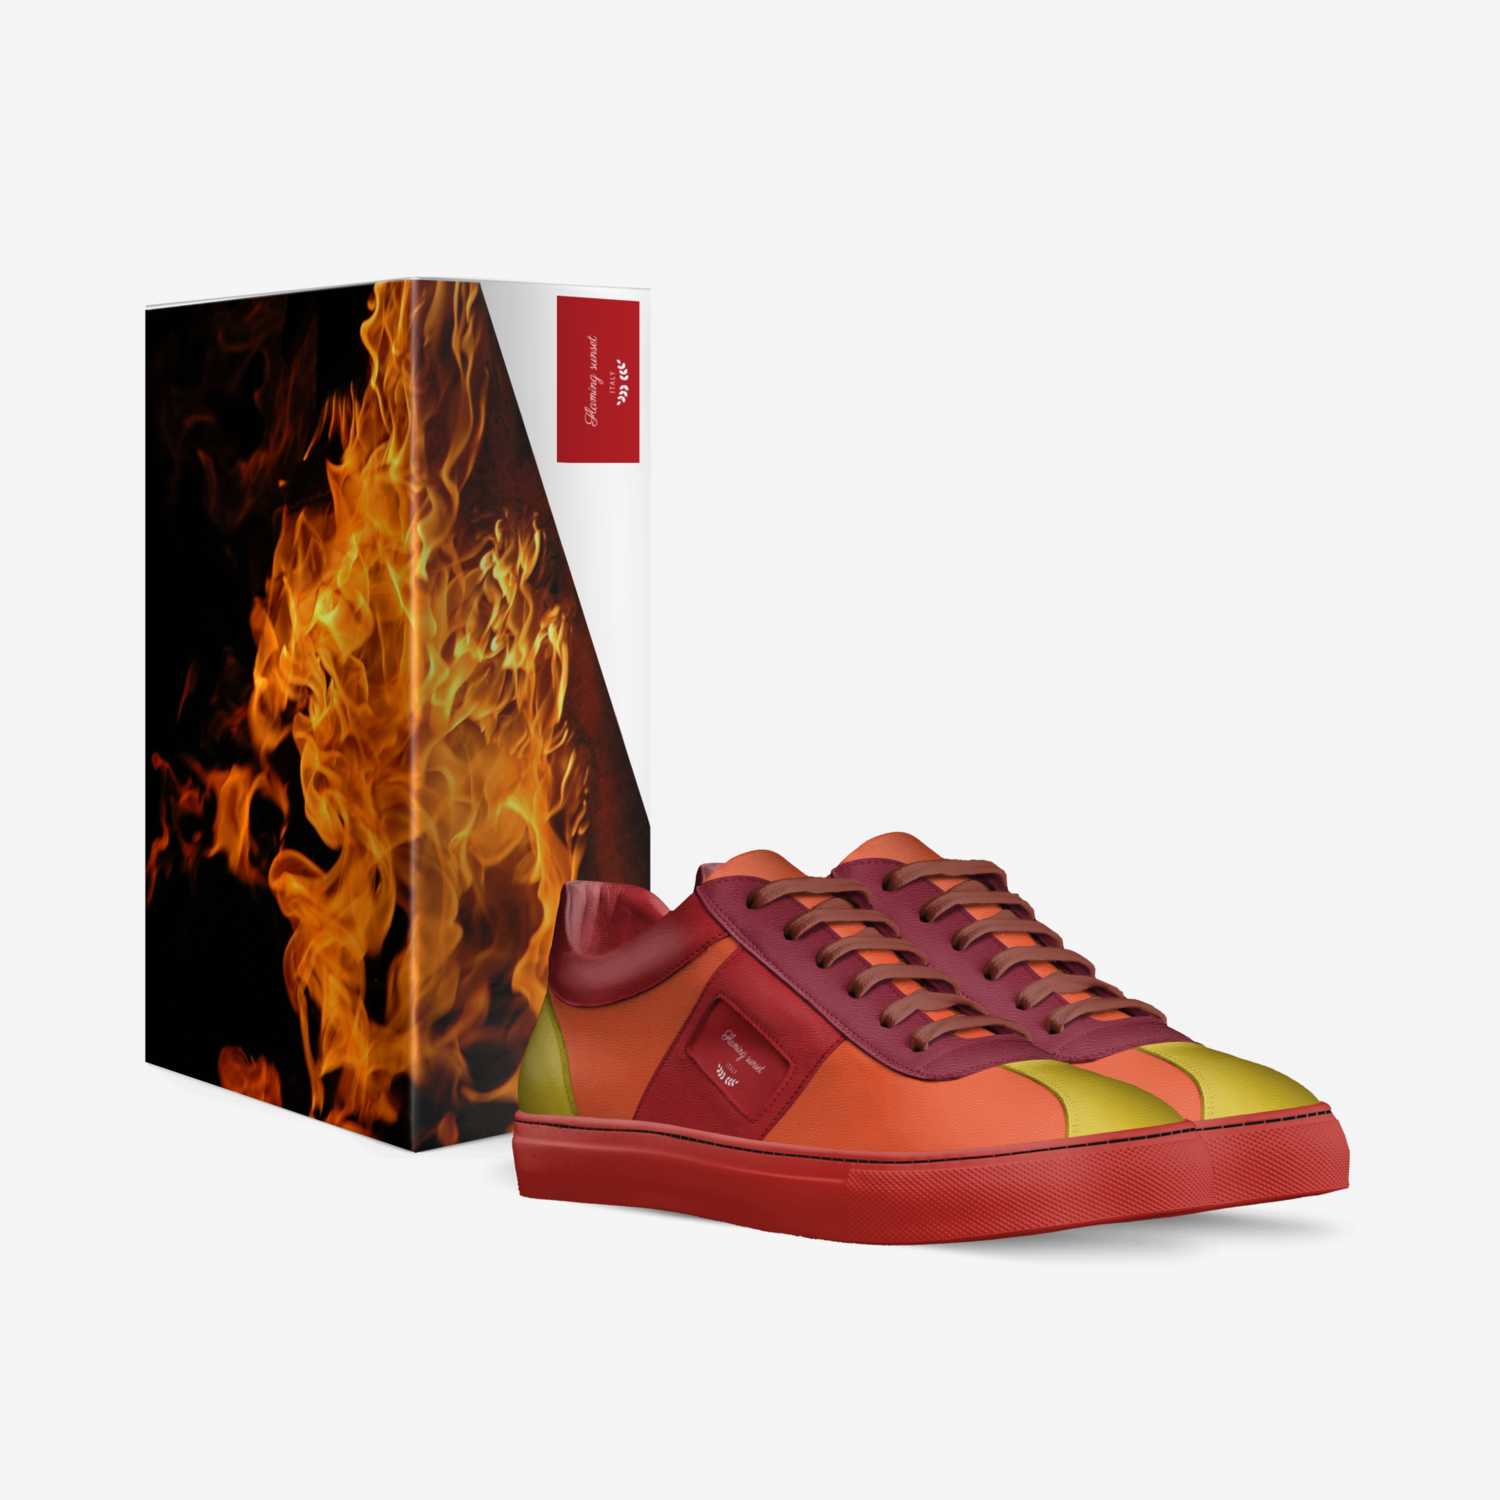 Flaming sunset custom made in Italy shoes by Rich Hudson | Box view